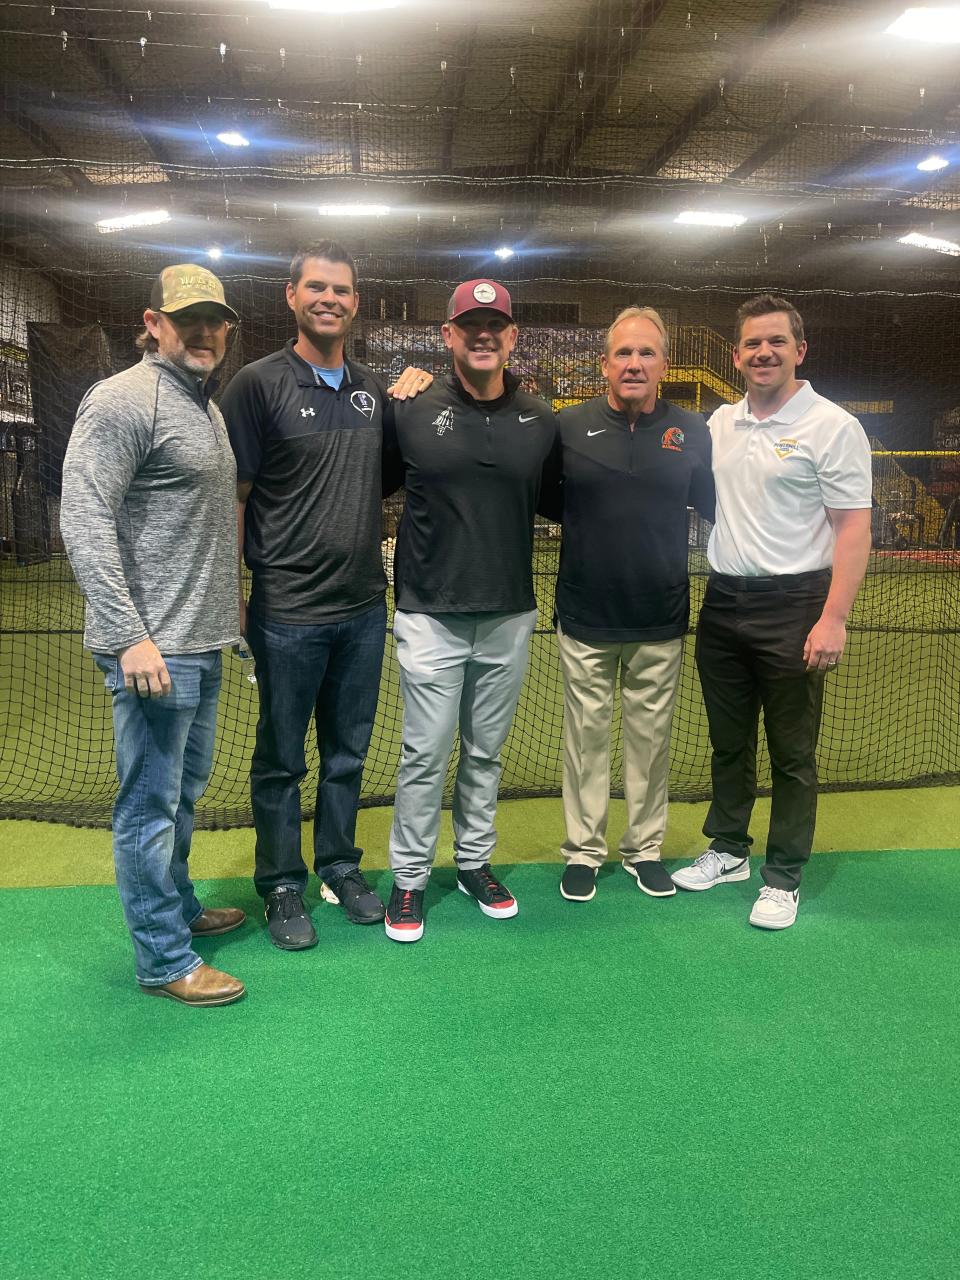 Left to right: Tallahaseee Powermill Training Academy instructor Chris Chavez, Tallahassee Community College baseball coach Bryan Henry, Florida State University baseball assistant coach Rich Wallace, Florida A&M University baseball head coach Jamey Shouppe, and Tallahassee Powermill Training Academy owner and operator Bryan Brown poses for photo at recruiting workshop at Powermill Training Academy, Tallahassee, Florida, Monday, Jan. 23, 2023